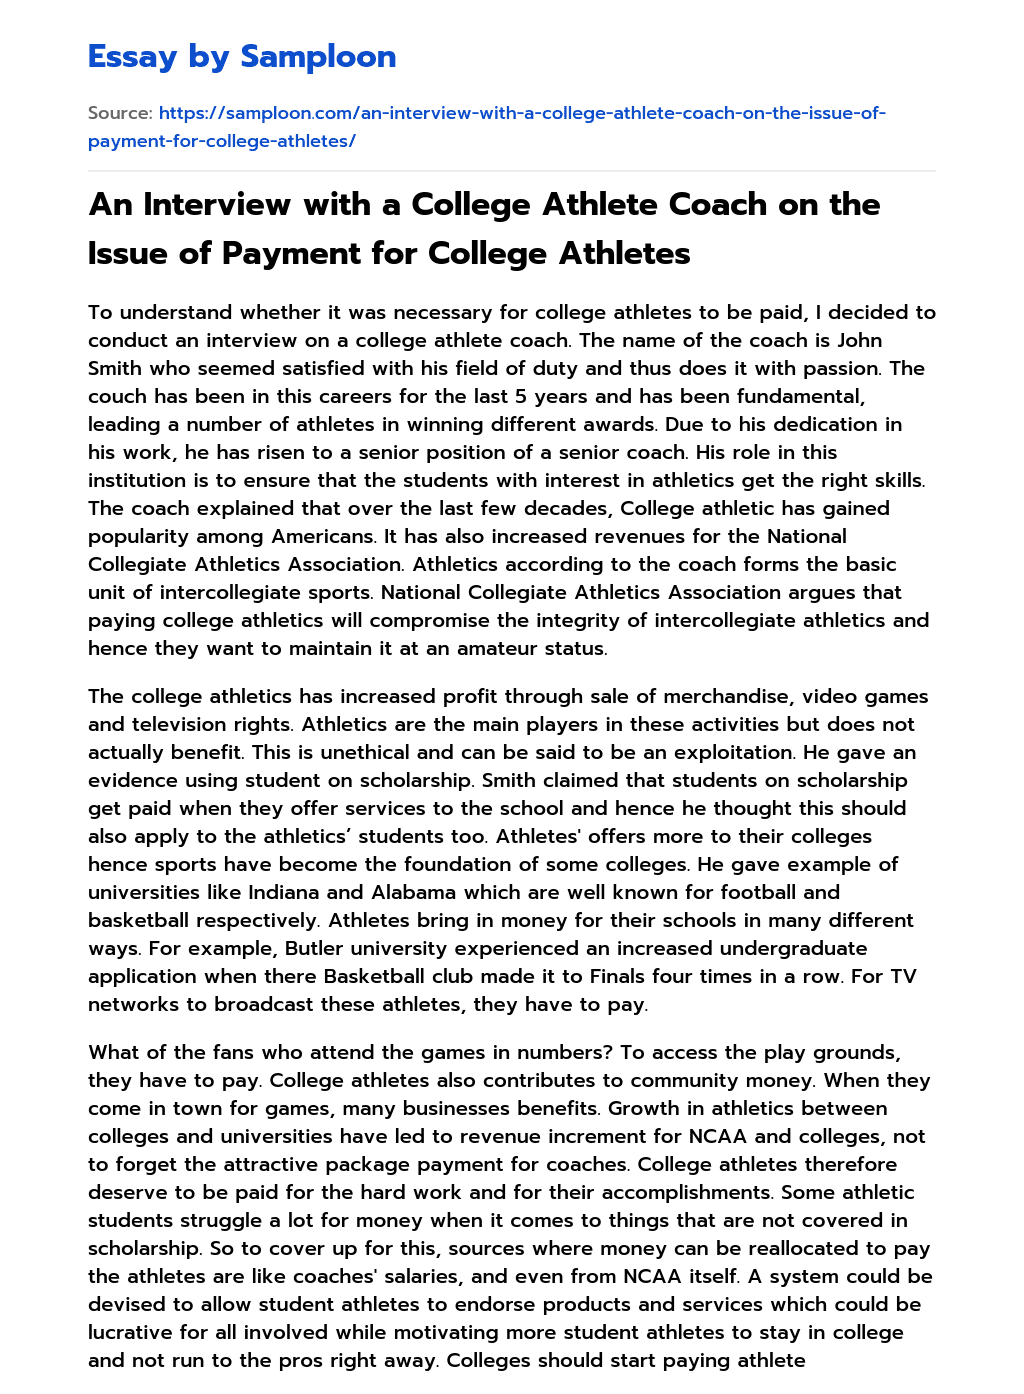 An Interview with a College Athlete Coach on the Issue of Payment for College Athletes essay